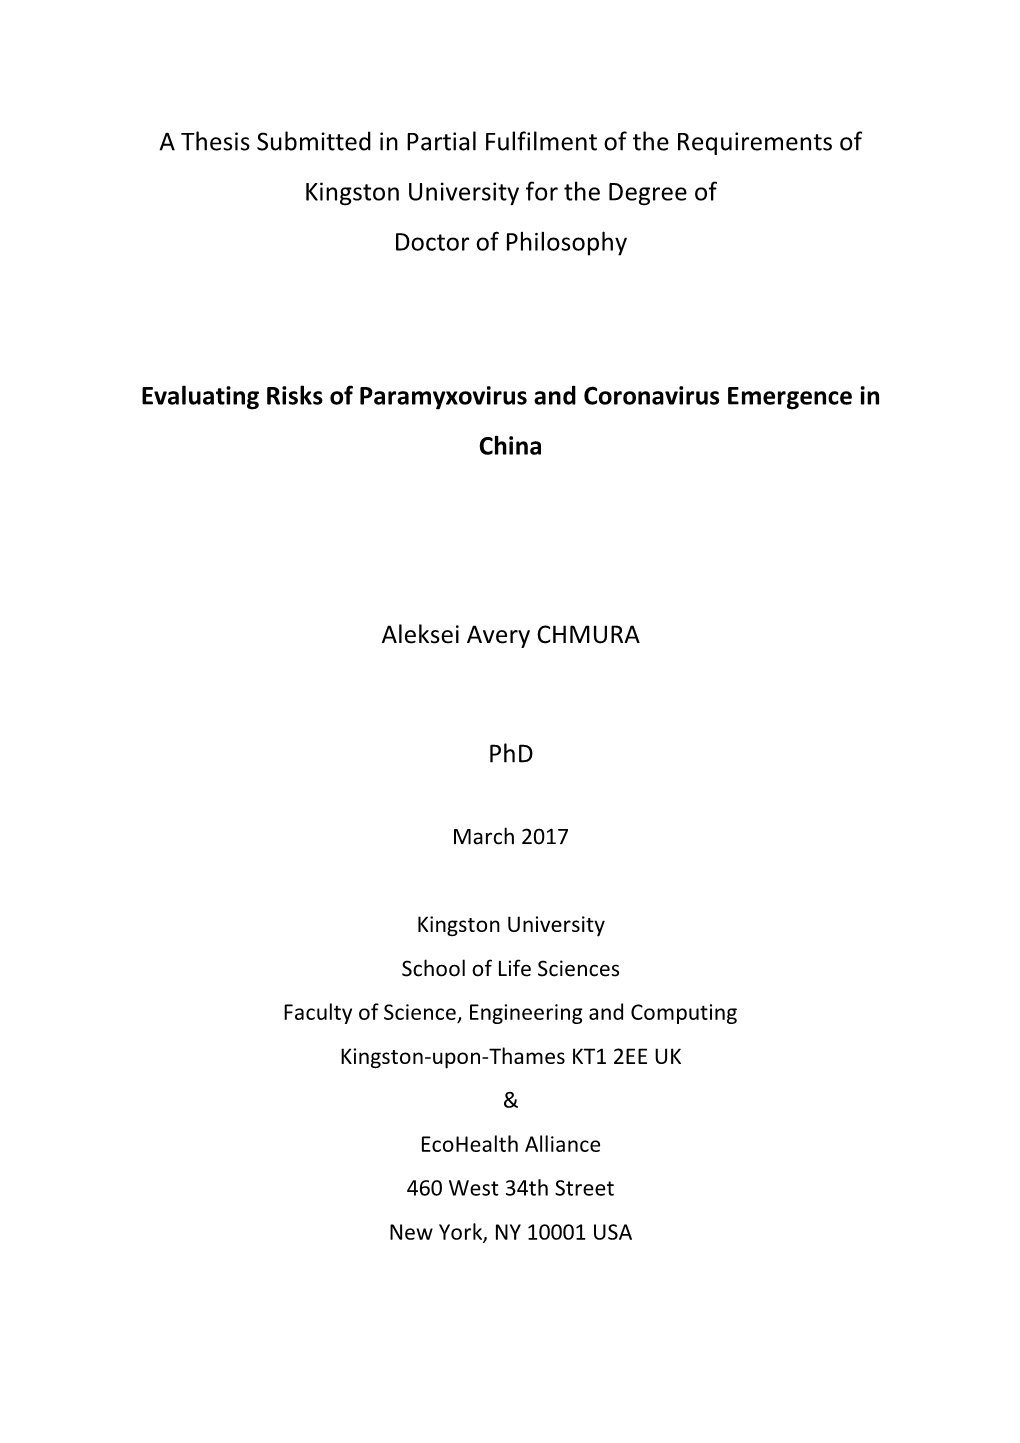 A Thesis Submitted in Partial Fulfilment of the Requirements of Kingston University for the Degree of Doctor of Philosophy